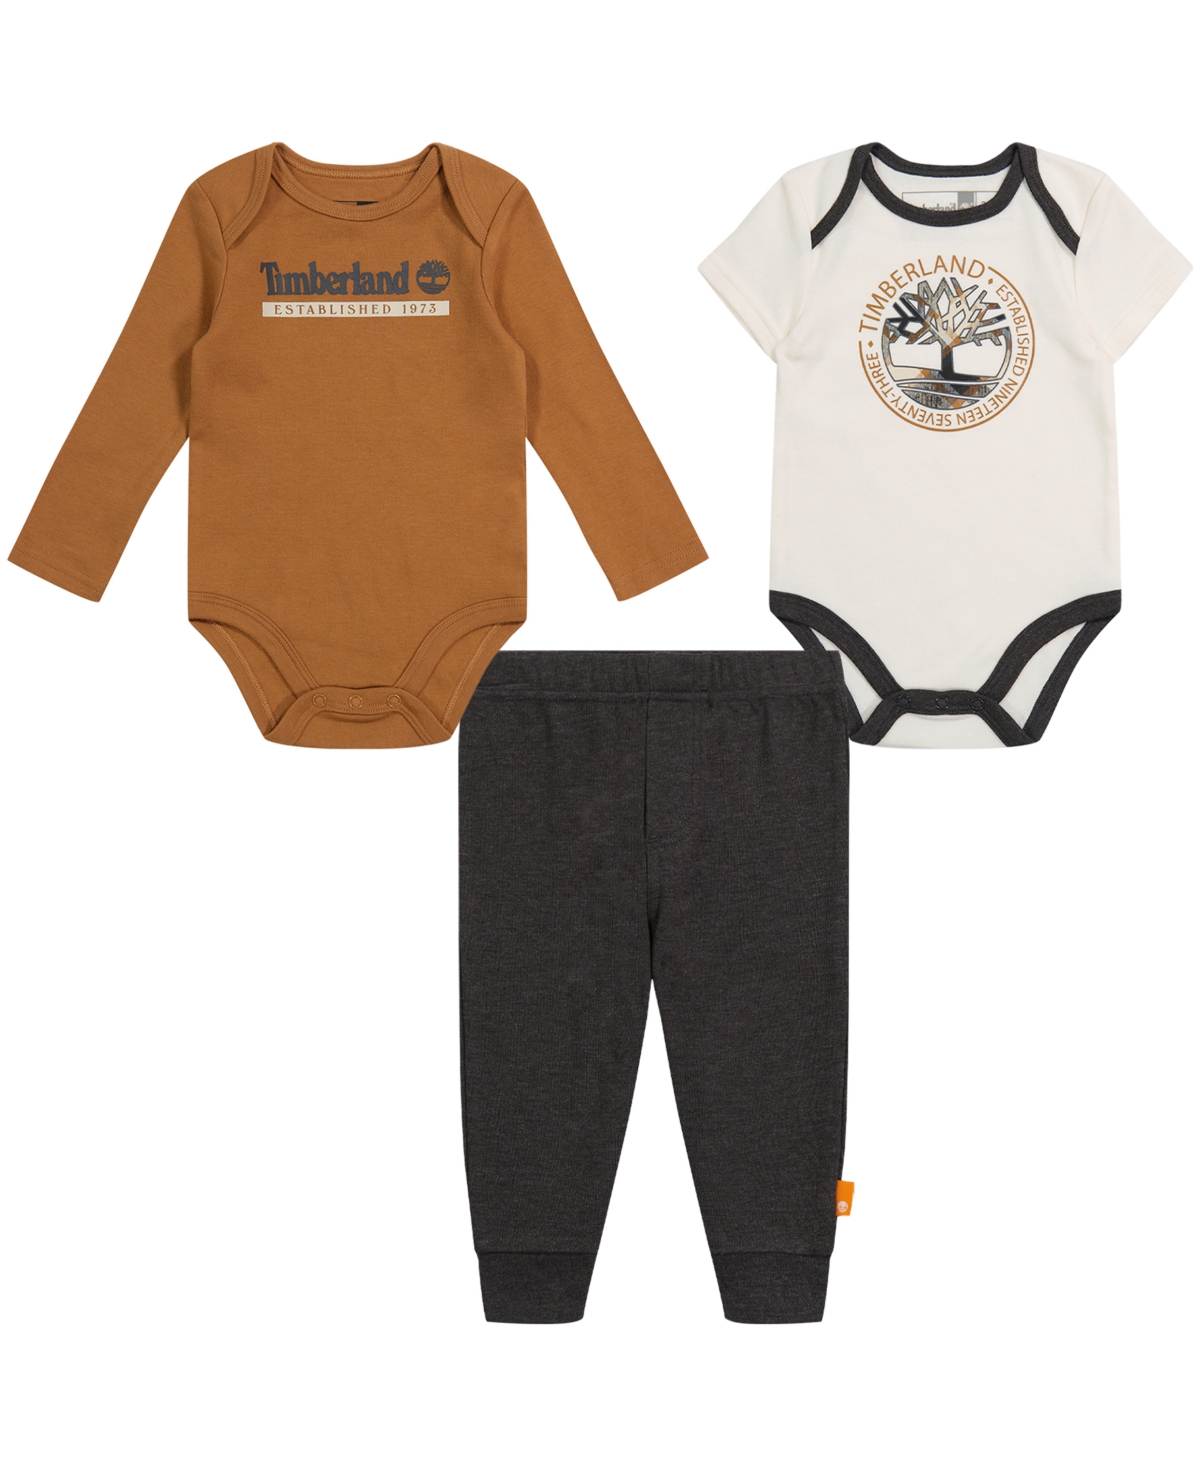 Timberland Baby Boys Logo Long Sleeve And Short Sleeve Bodysuits And Heather Joggers, 3 Piece Set In Assorted